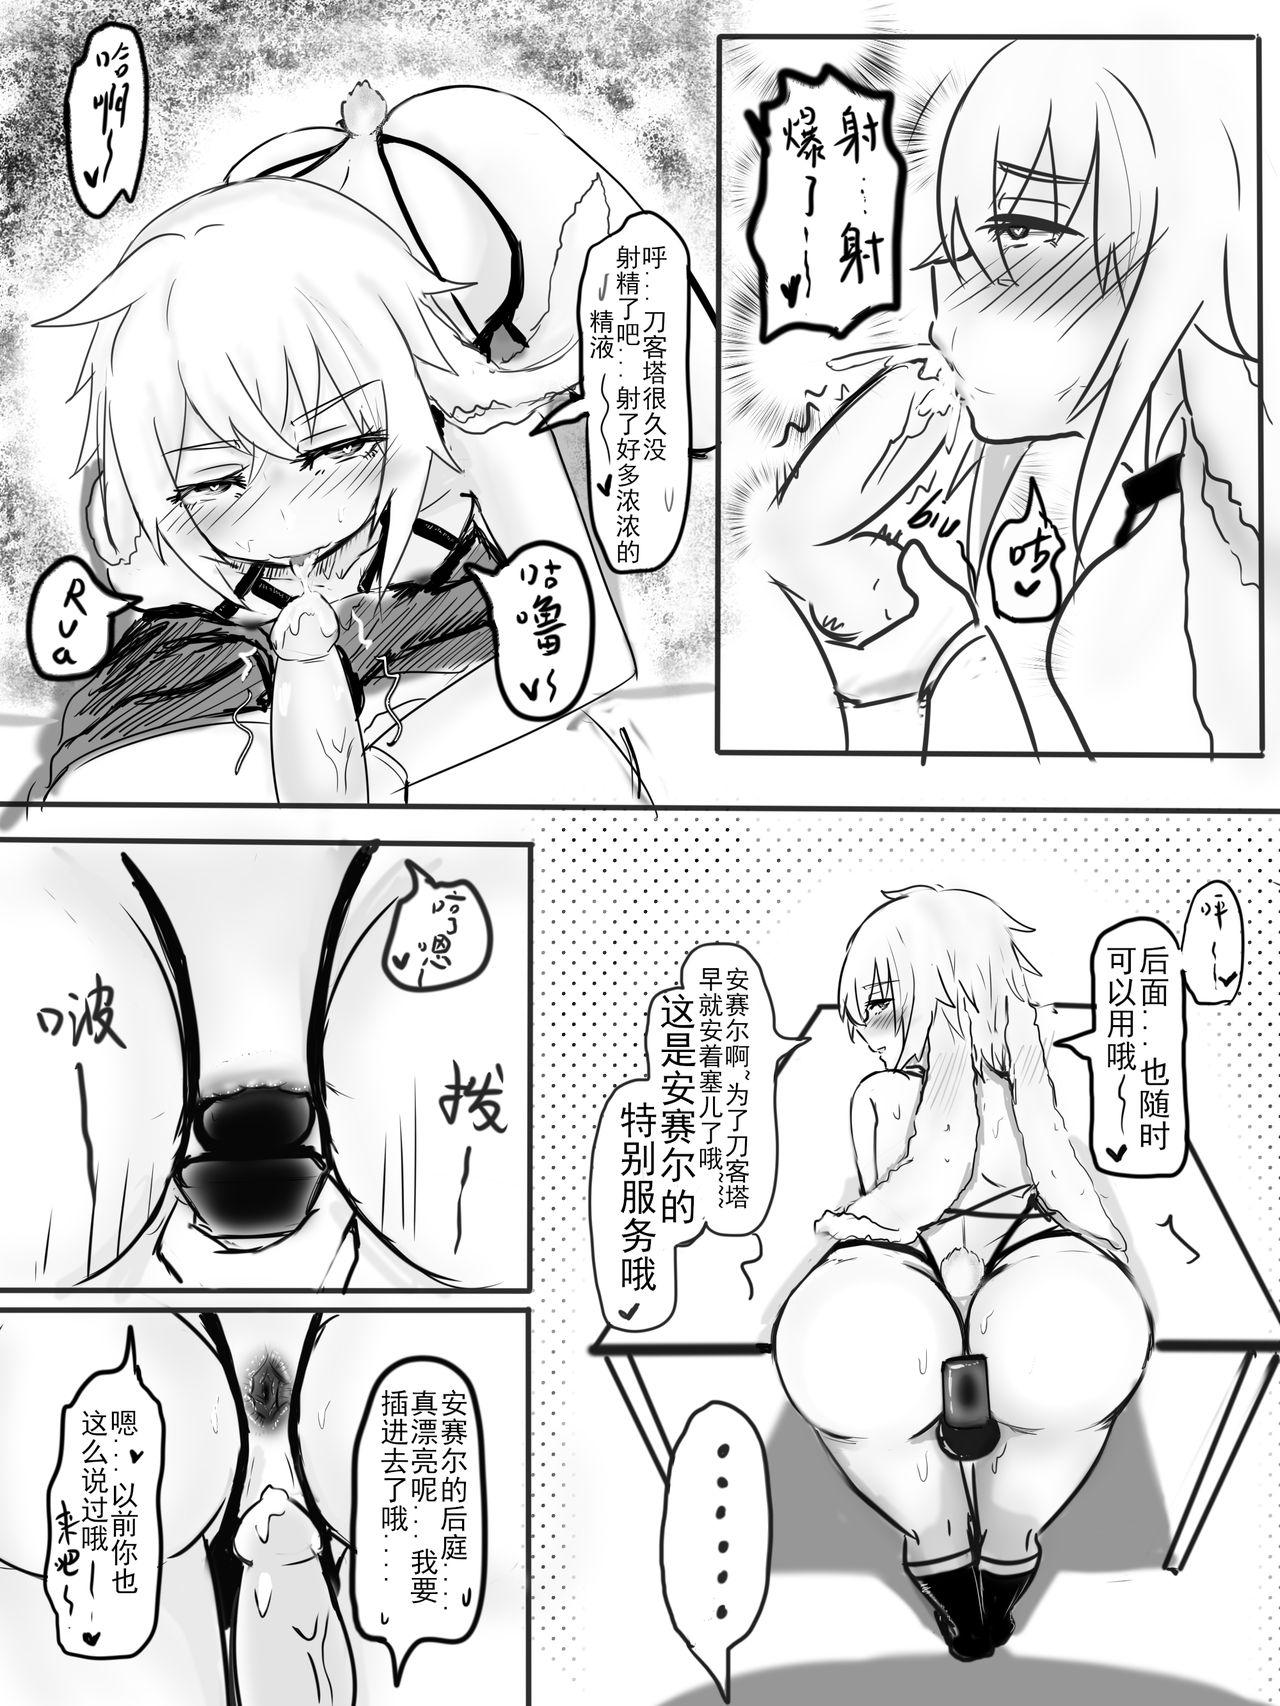 Wet Pussy 安赛尔的特别服务1 - Arknights Man - Page 8